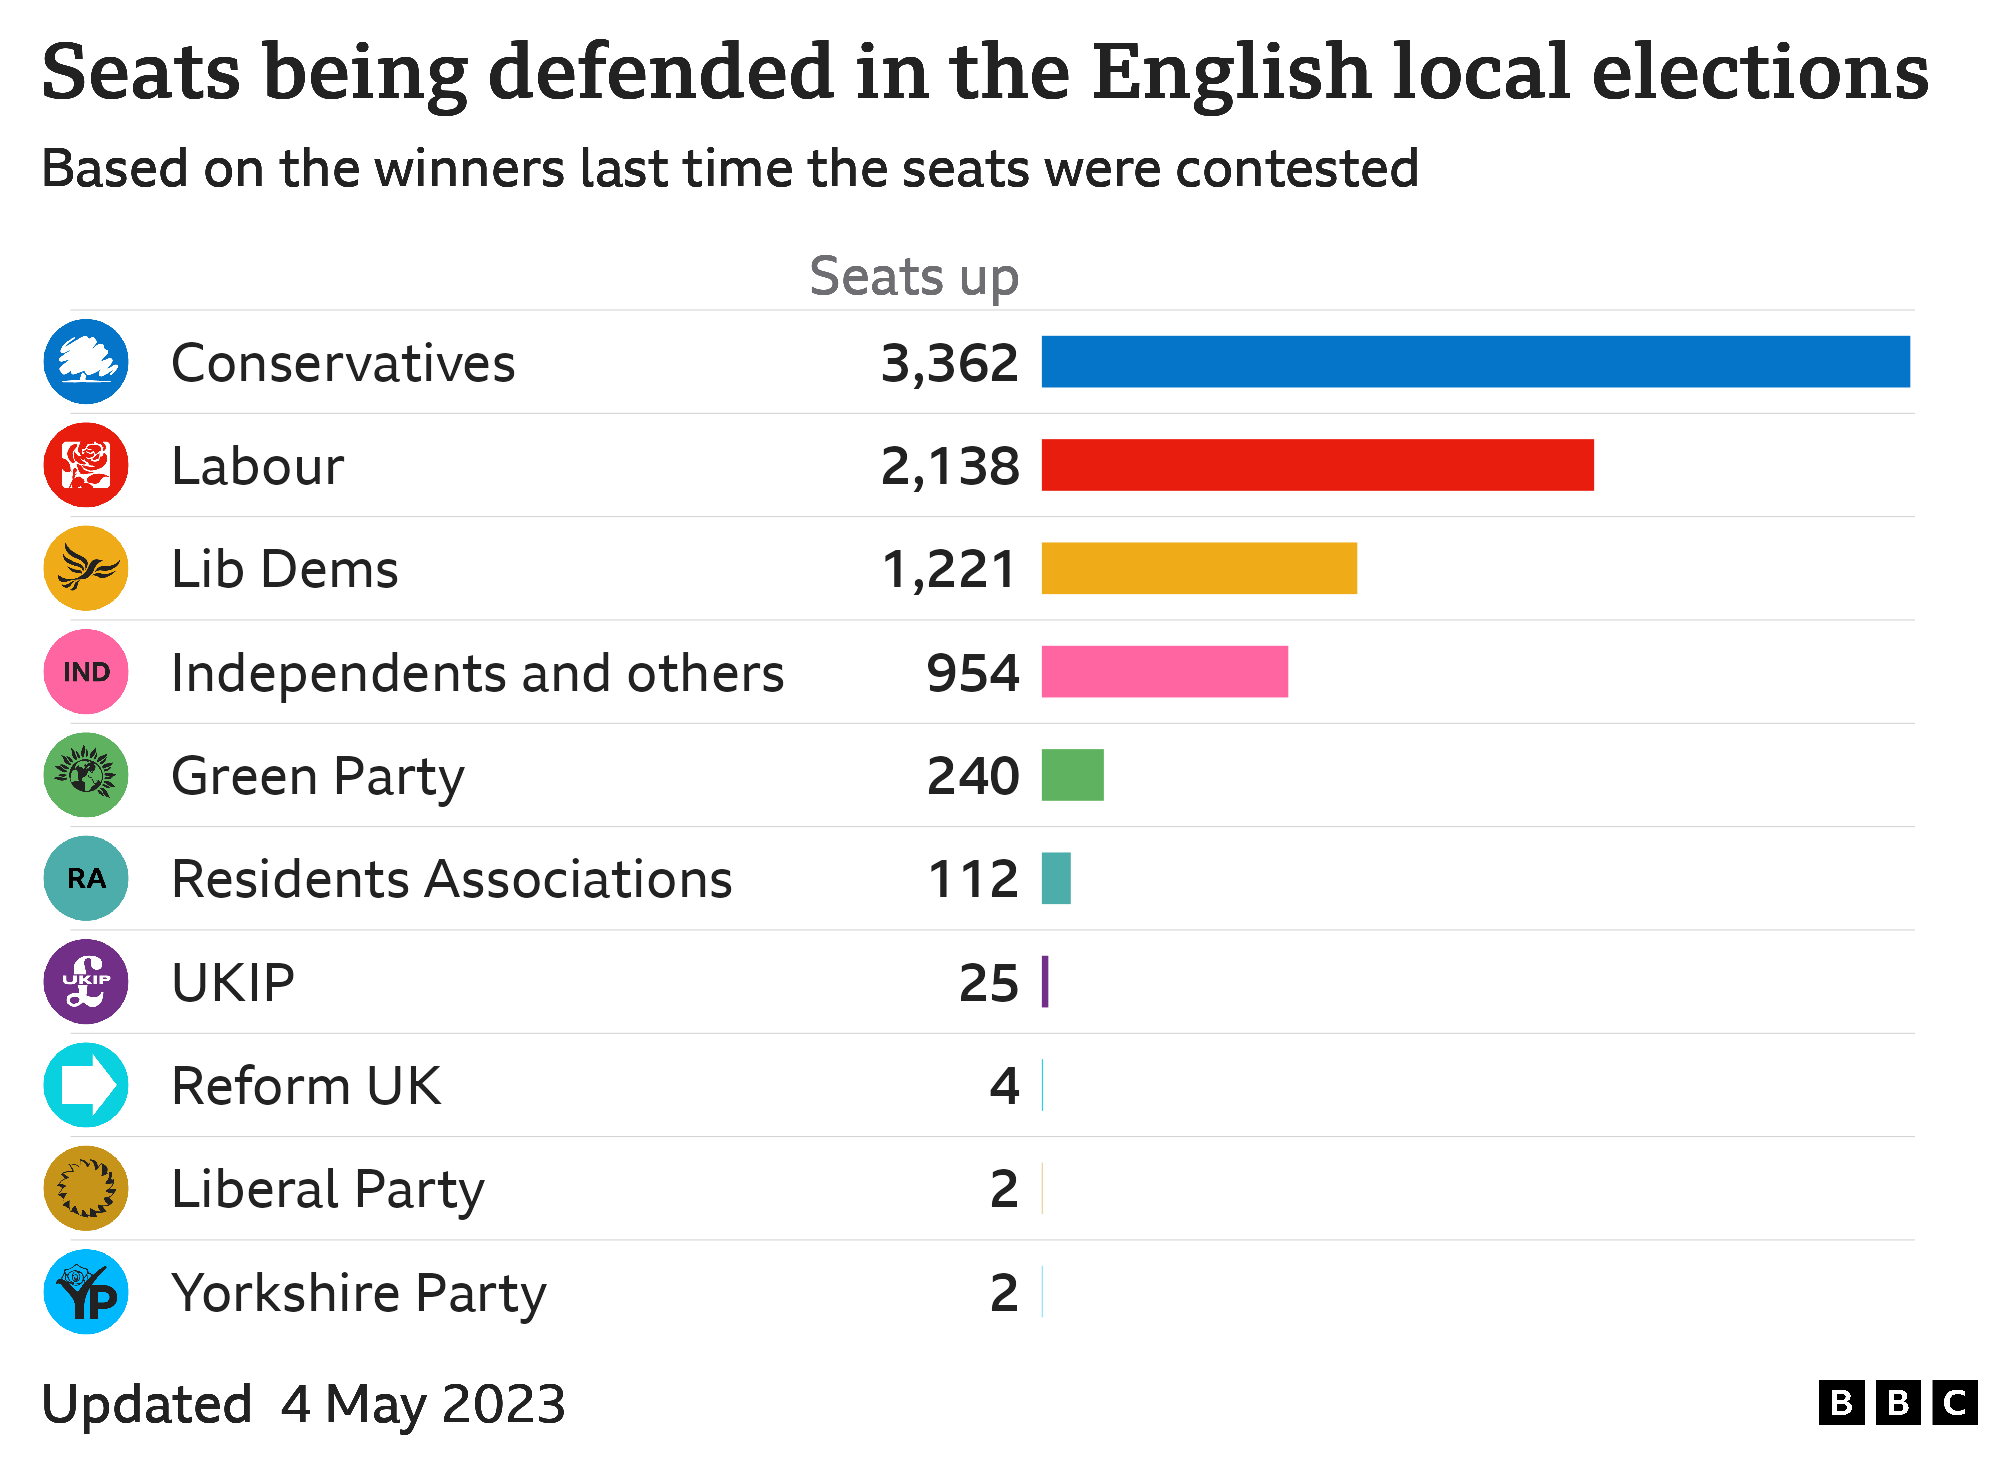 Bar chart showing council seats defended by each party in England, Conservatives 3362, Labour 2138, Lib Dems 1221, Independents and others 954, Green Party 240, Residents Associations 112, UKIP 25, Reform UK 4, Liberal Party 2, Yorkshire Party 2